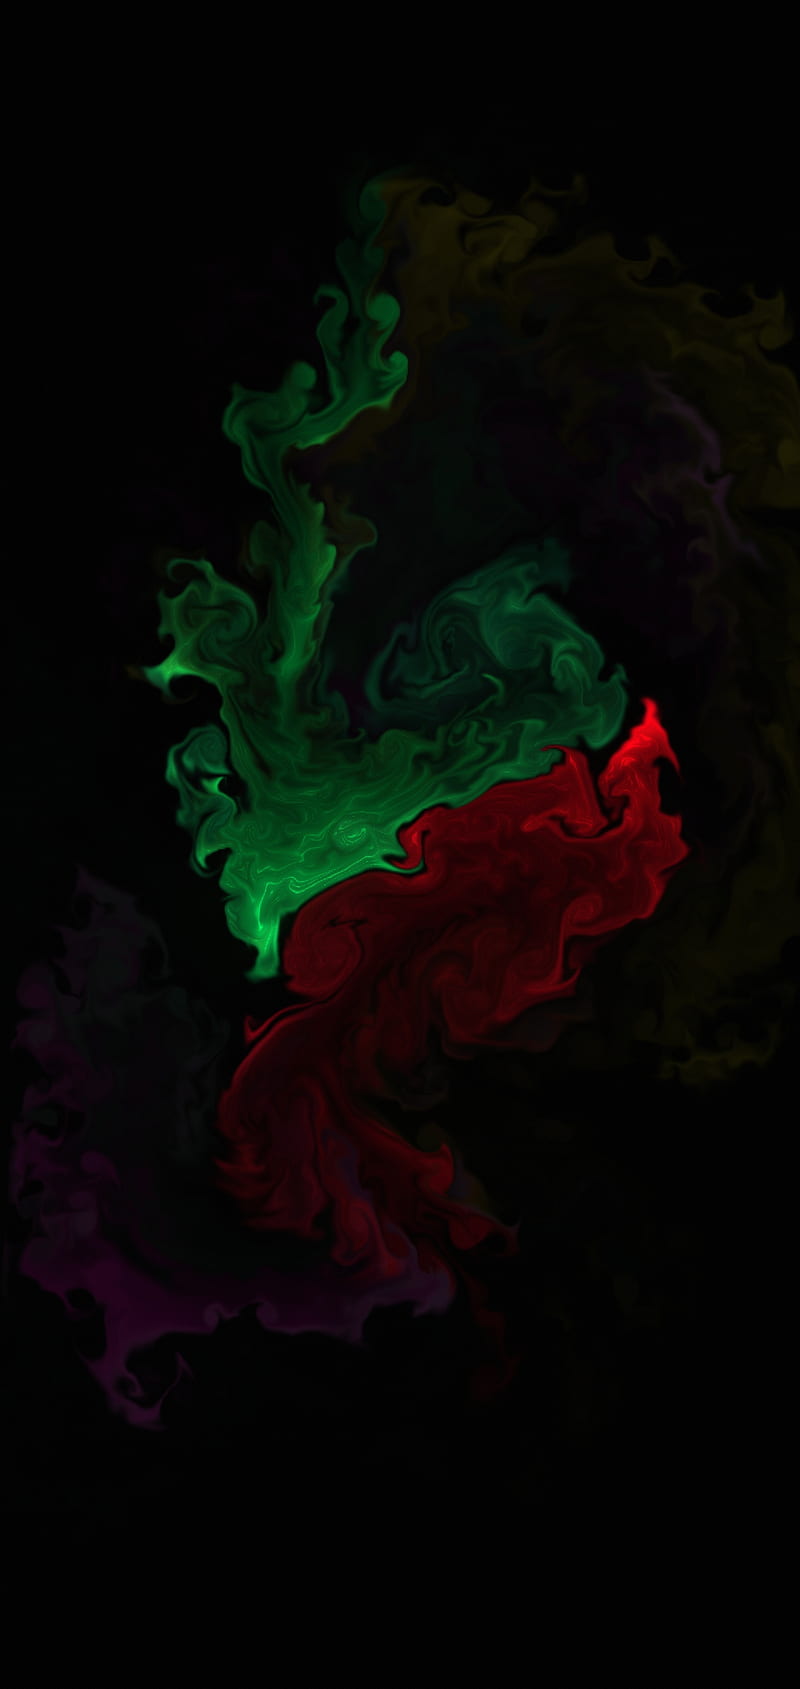 Green and Red Wallpaper 13  1200x675